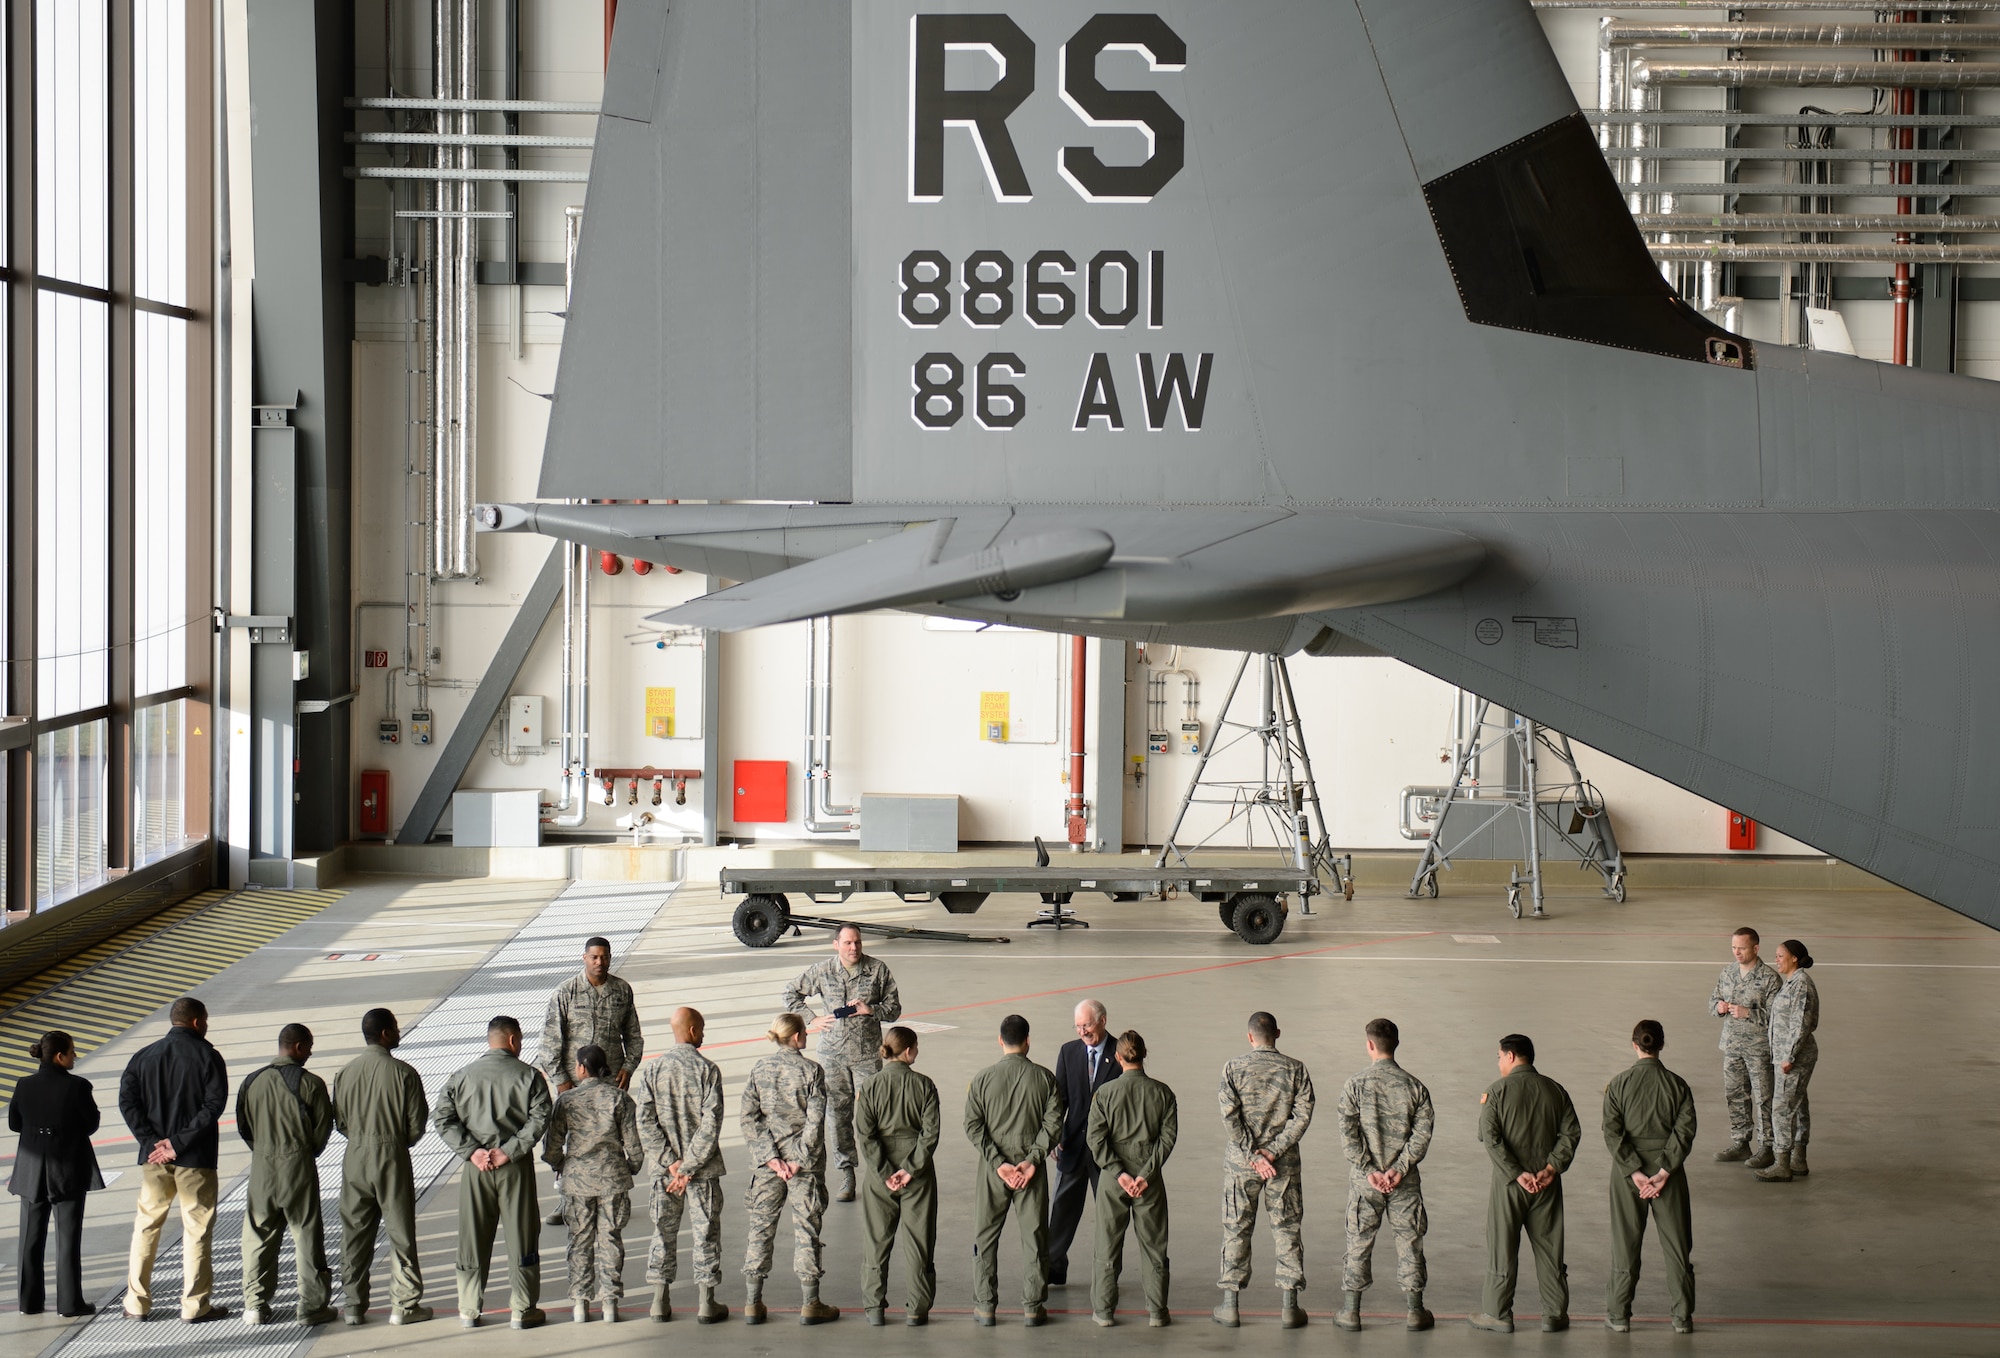 Members of the 86th Airlift Wing speak with Sam E. Parish, retired Chief Master Sergeant of the Air Force, after showcasing their mission and the C-130J Super Hercules Jan. 26, 2016, at Ramstein Air Base, Germany. Parish spent a week learning about the Airmen of Ramstein and completed his visit by guest speaking at the Chief Recognition Ceremony. The Airmen of the 86th showed Parish how they generate and employ air mobility enabling theater and strategic airpower by operating a key Air Force power projection platform at Ramstein.  (U.S. Air Force photo/Staff Sgt. Armando A. Schwier-Morales)